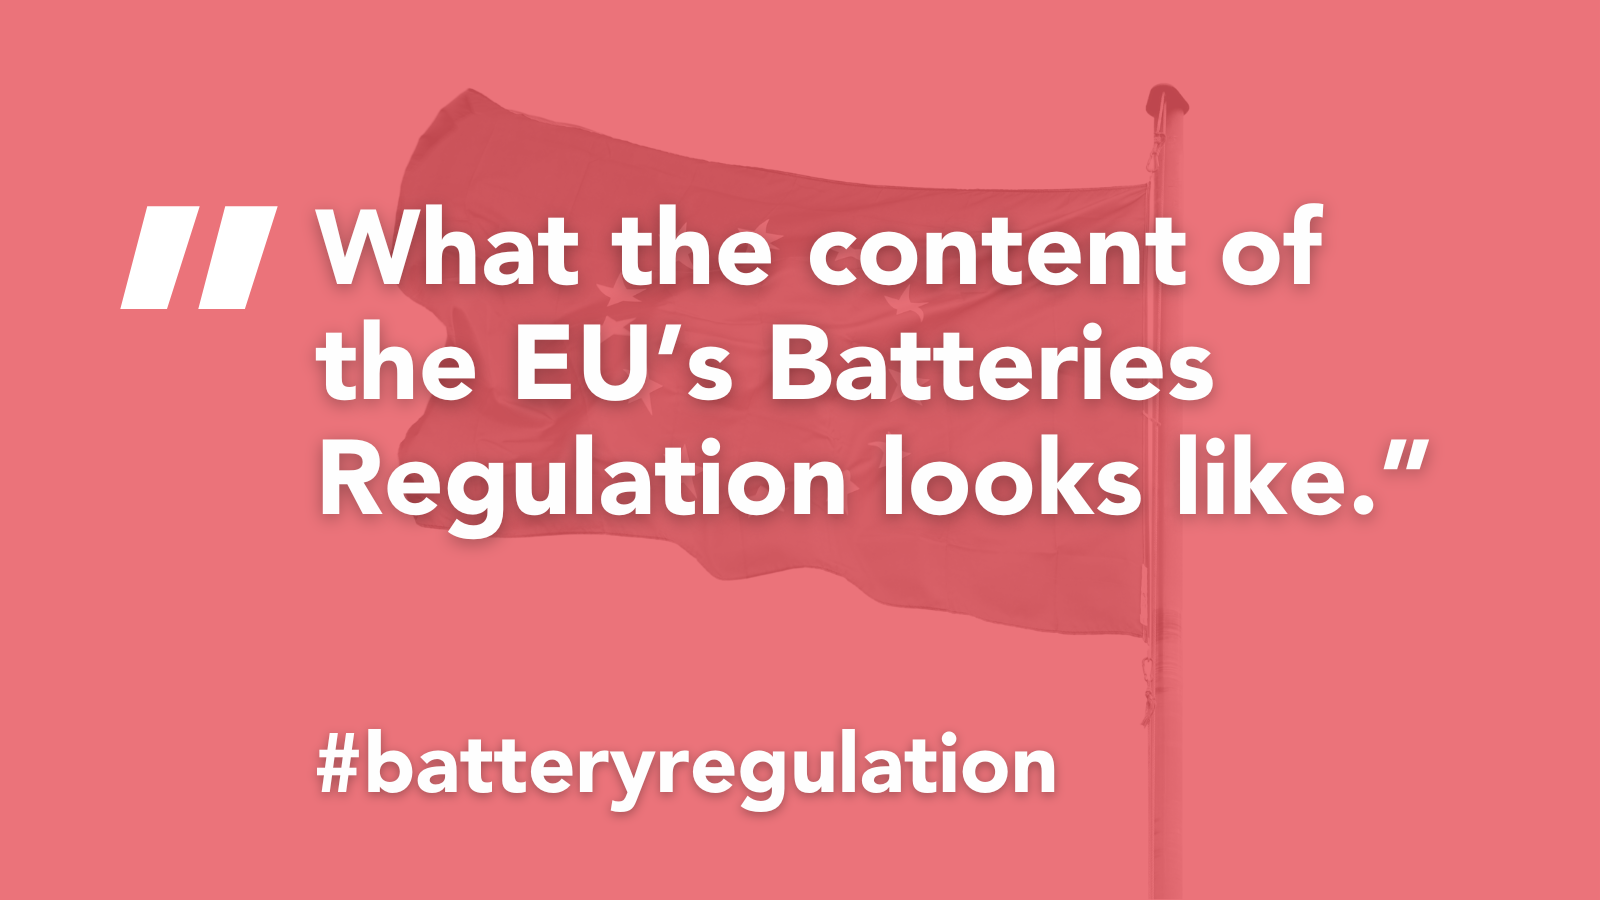 #BatteryRegulation: The content of the upcoming Batteries Regulation has been published—specifications regarding producer responsibility incoming